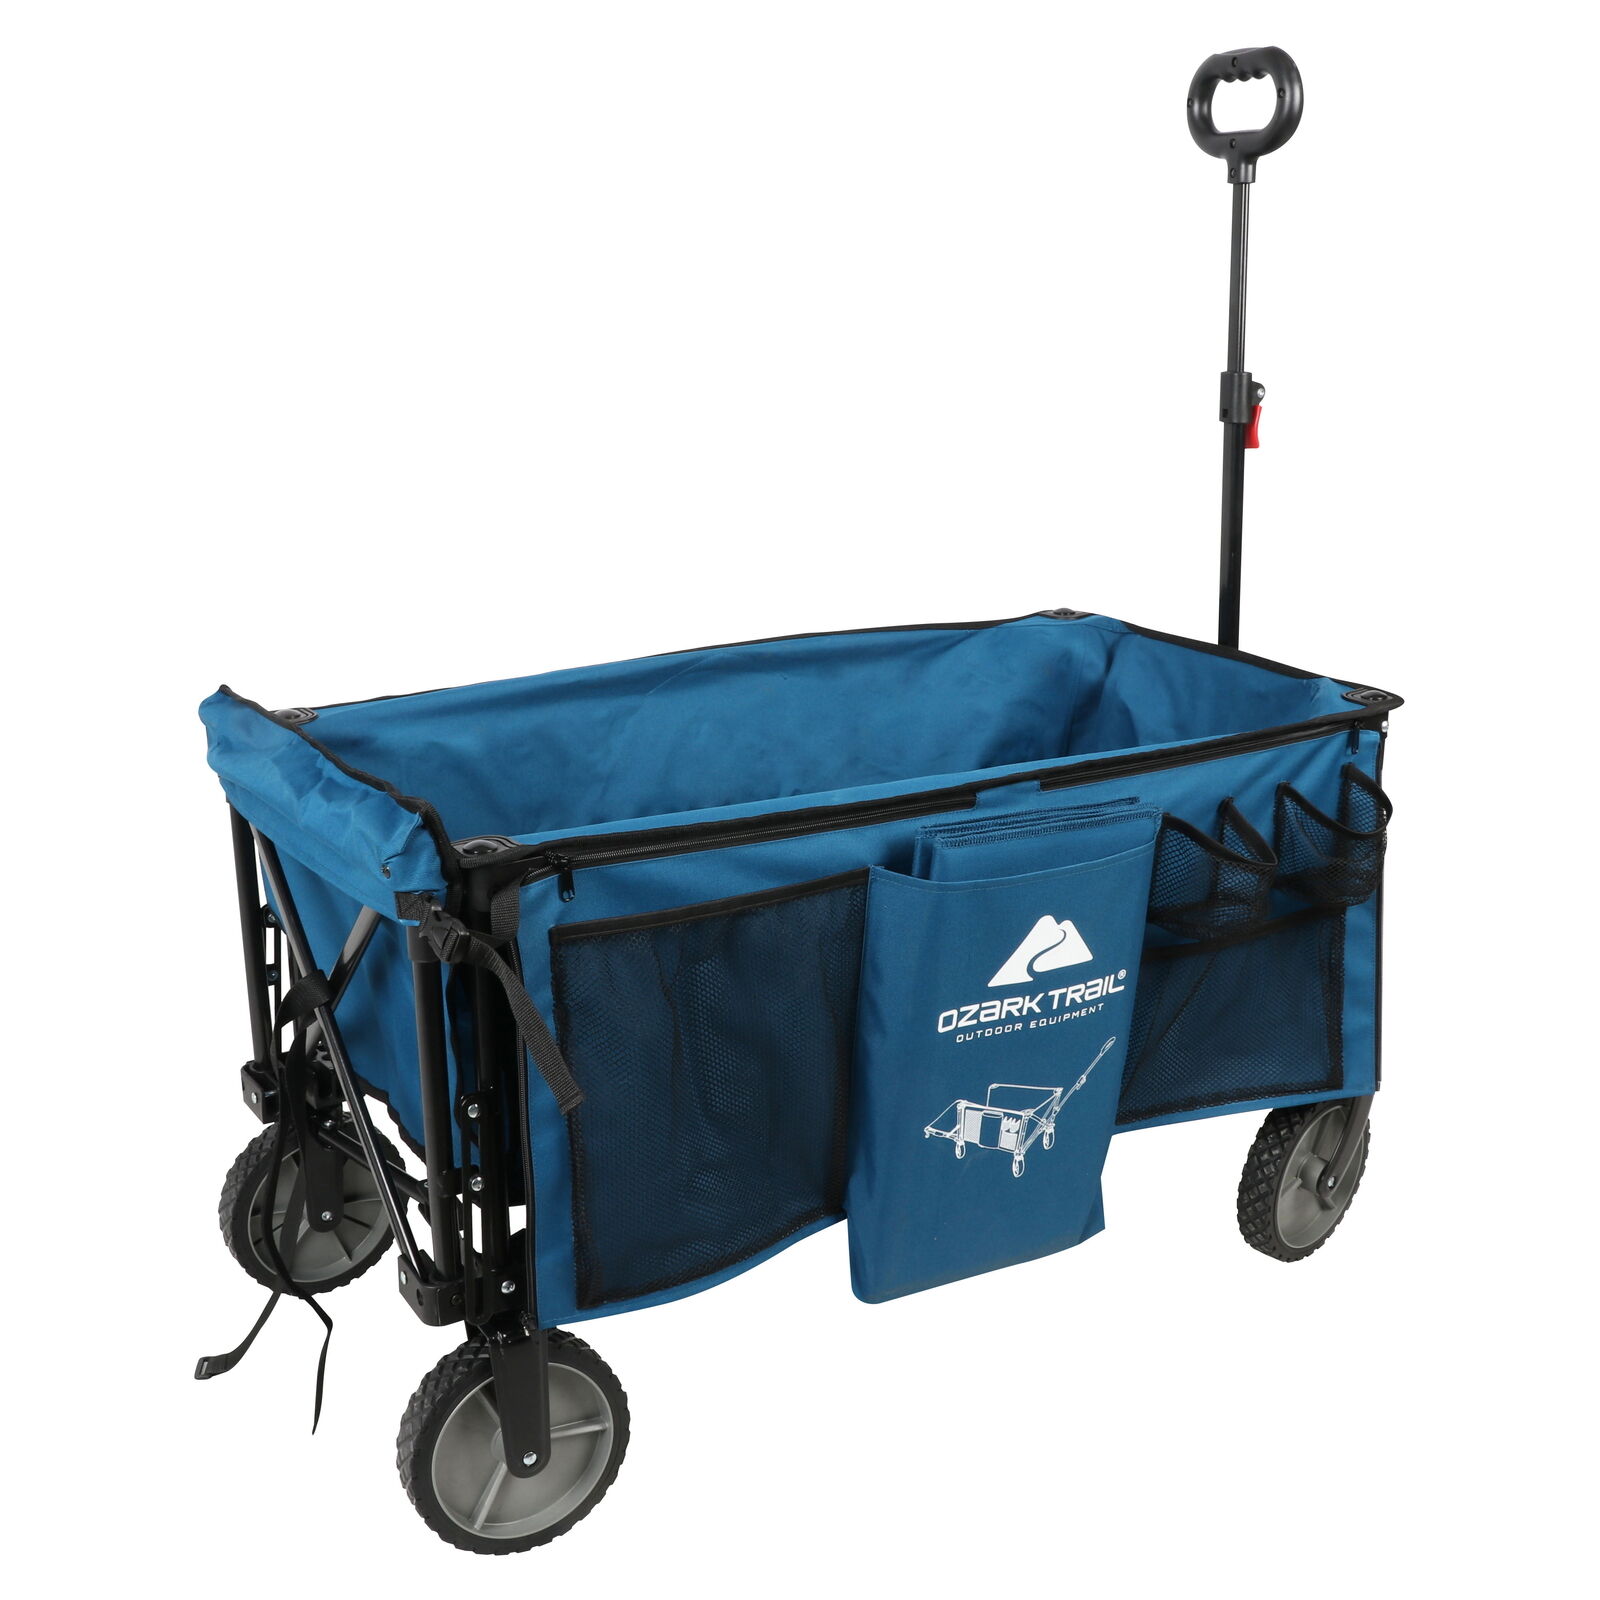 Folding Beach Outdoor Camping Wagon Cart Collapsible Utility Garden W/ Tailgate Does not apply